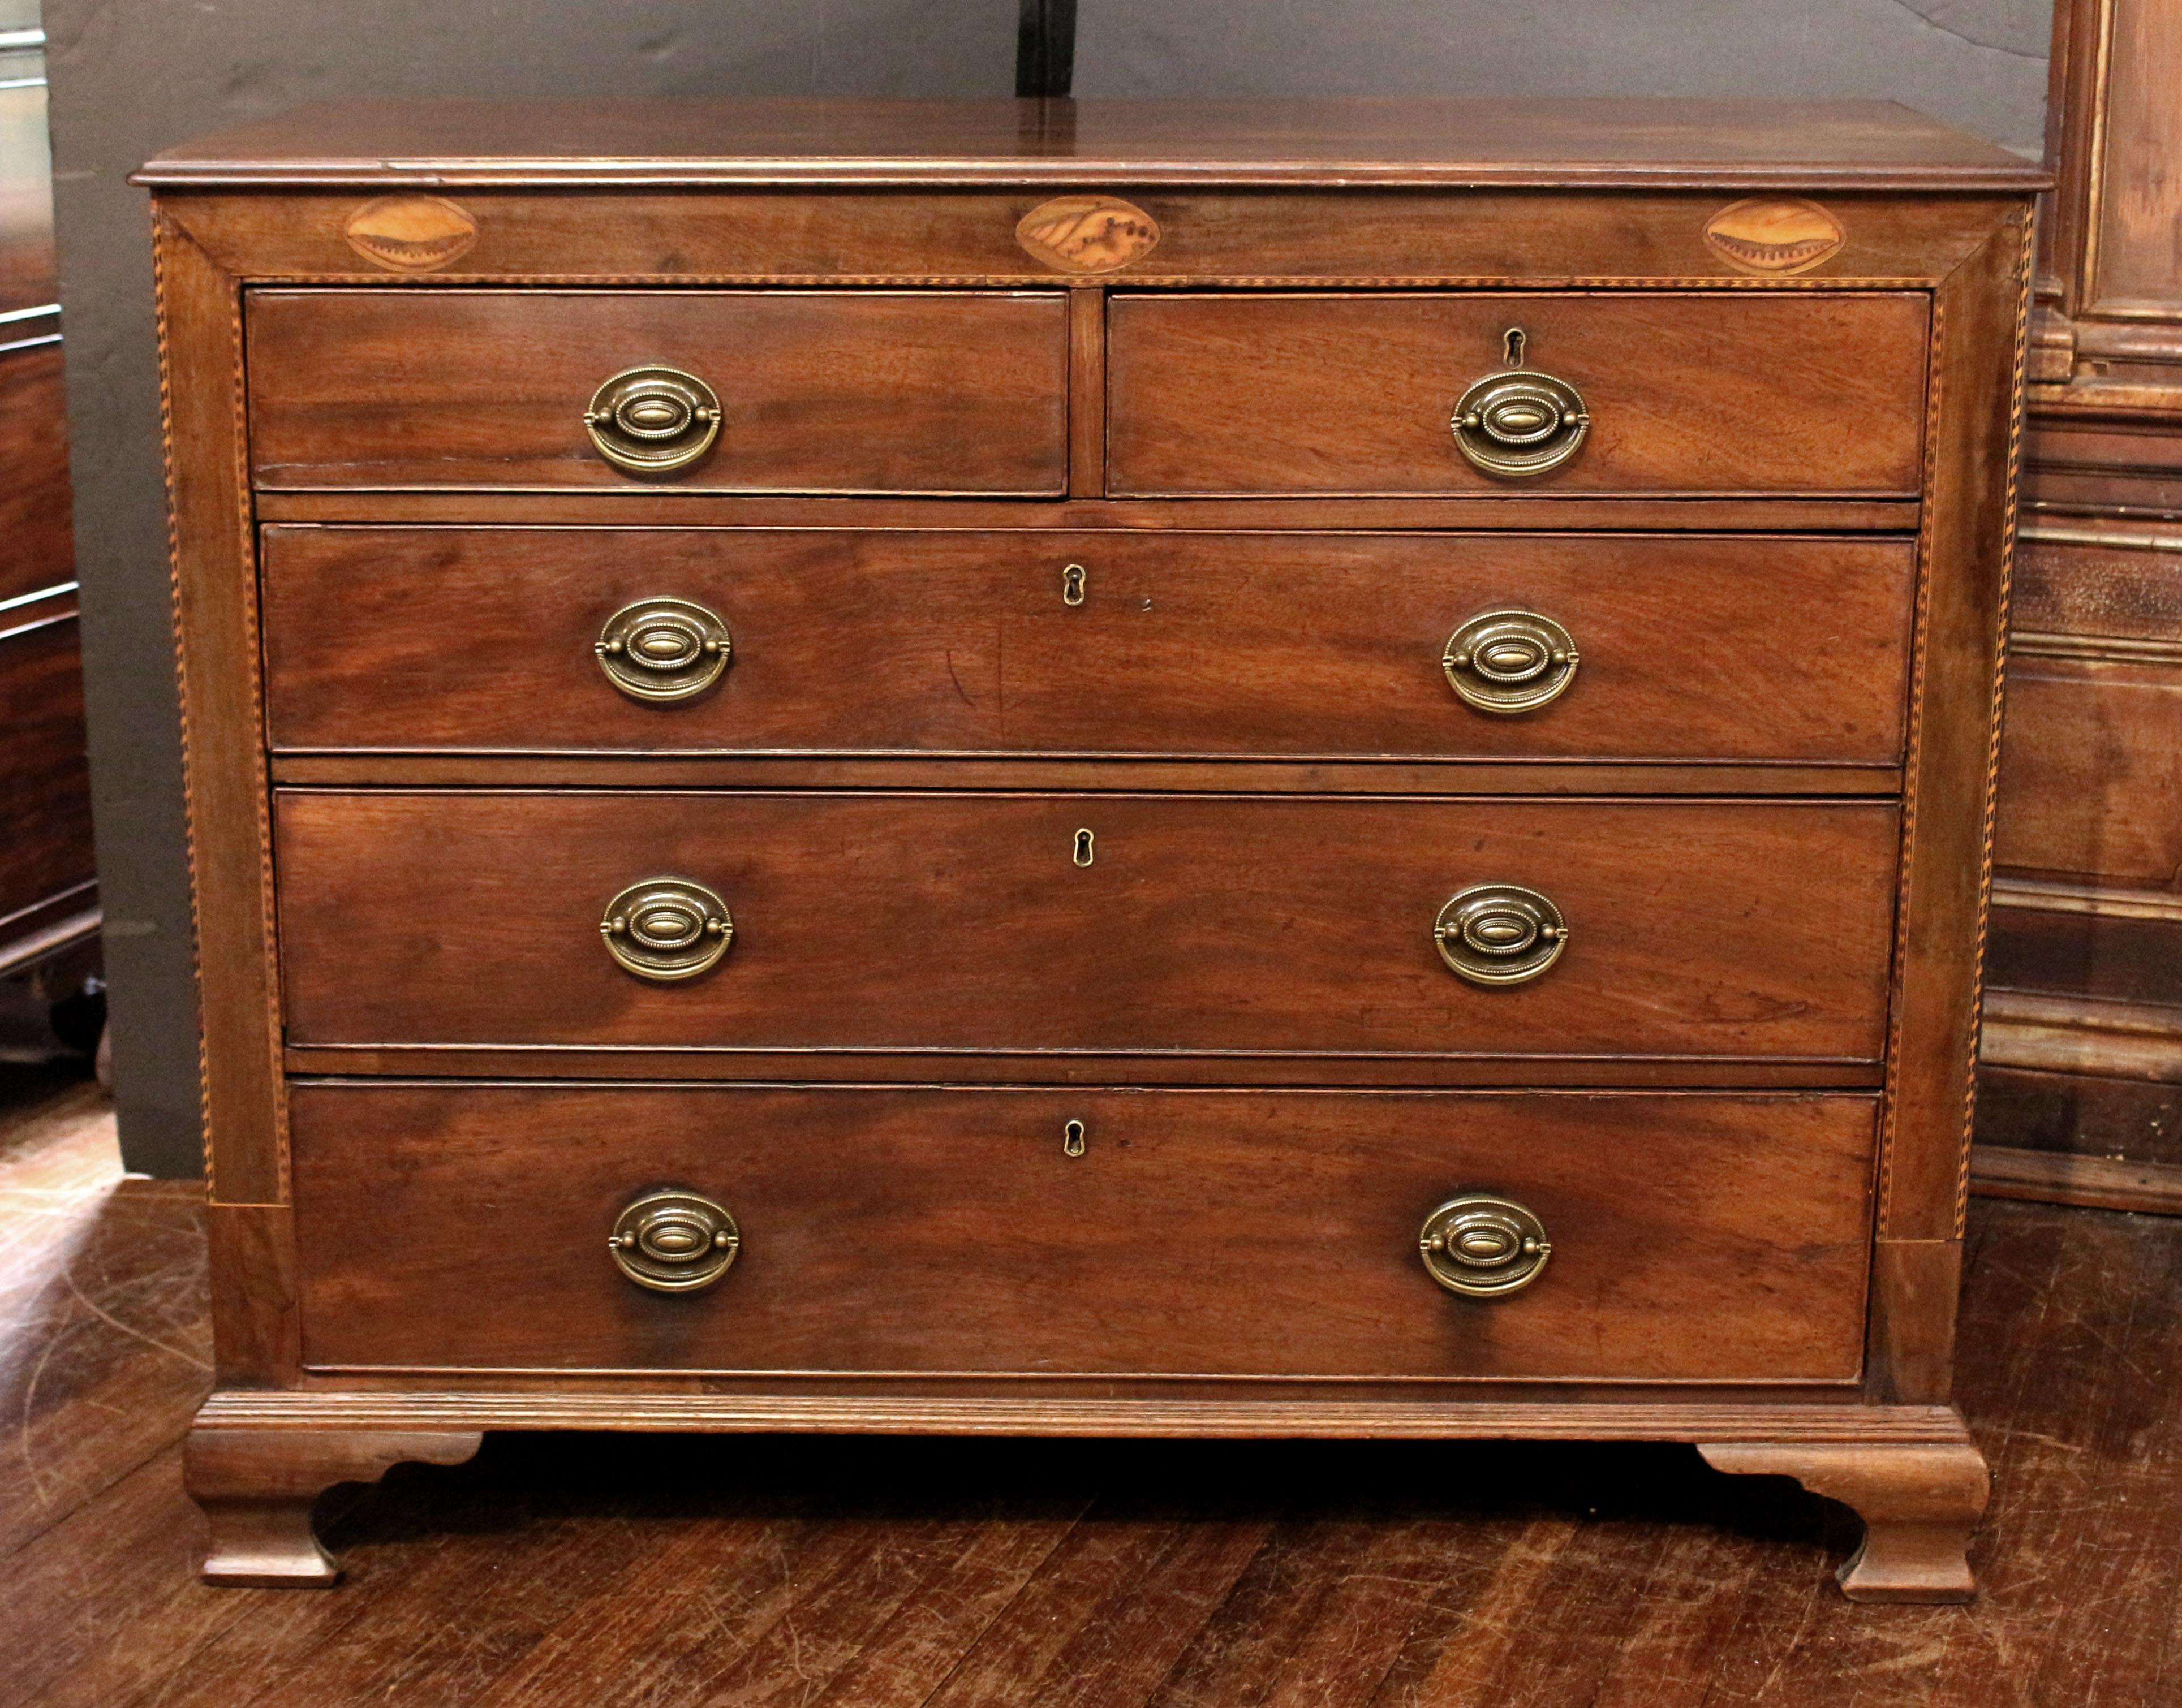 Early 19th century Georgian chest of drawers, English. Form typical of the north of England. Ogee bracket feet. Extensive barber pole inlays (minor losses). Three oval shell inlays across the frieze. Molded top. Oak secondary wood. Replaced oval